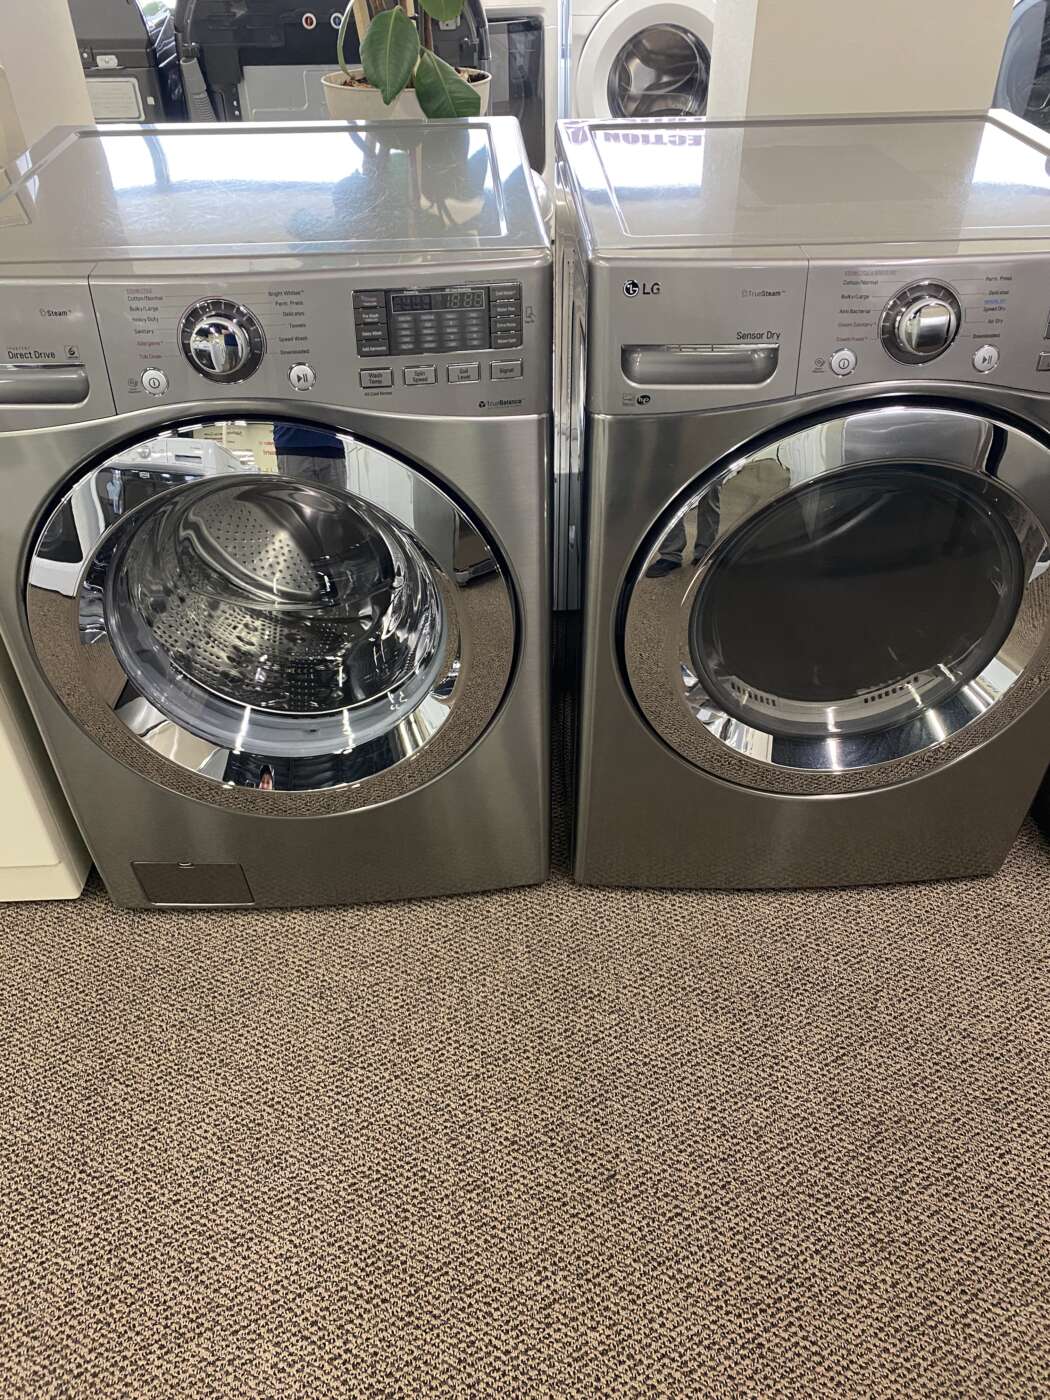 Reconditioned L/G 4.5 Cu. Ft. Front-Load Washer And 7.4 Cu. Ft. Electric Dryer Set